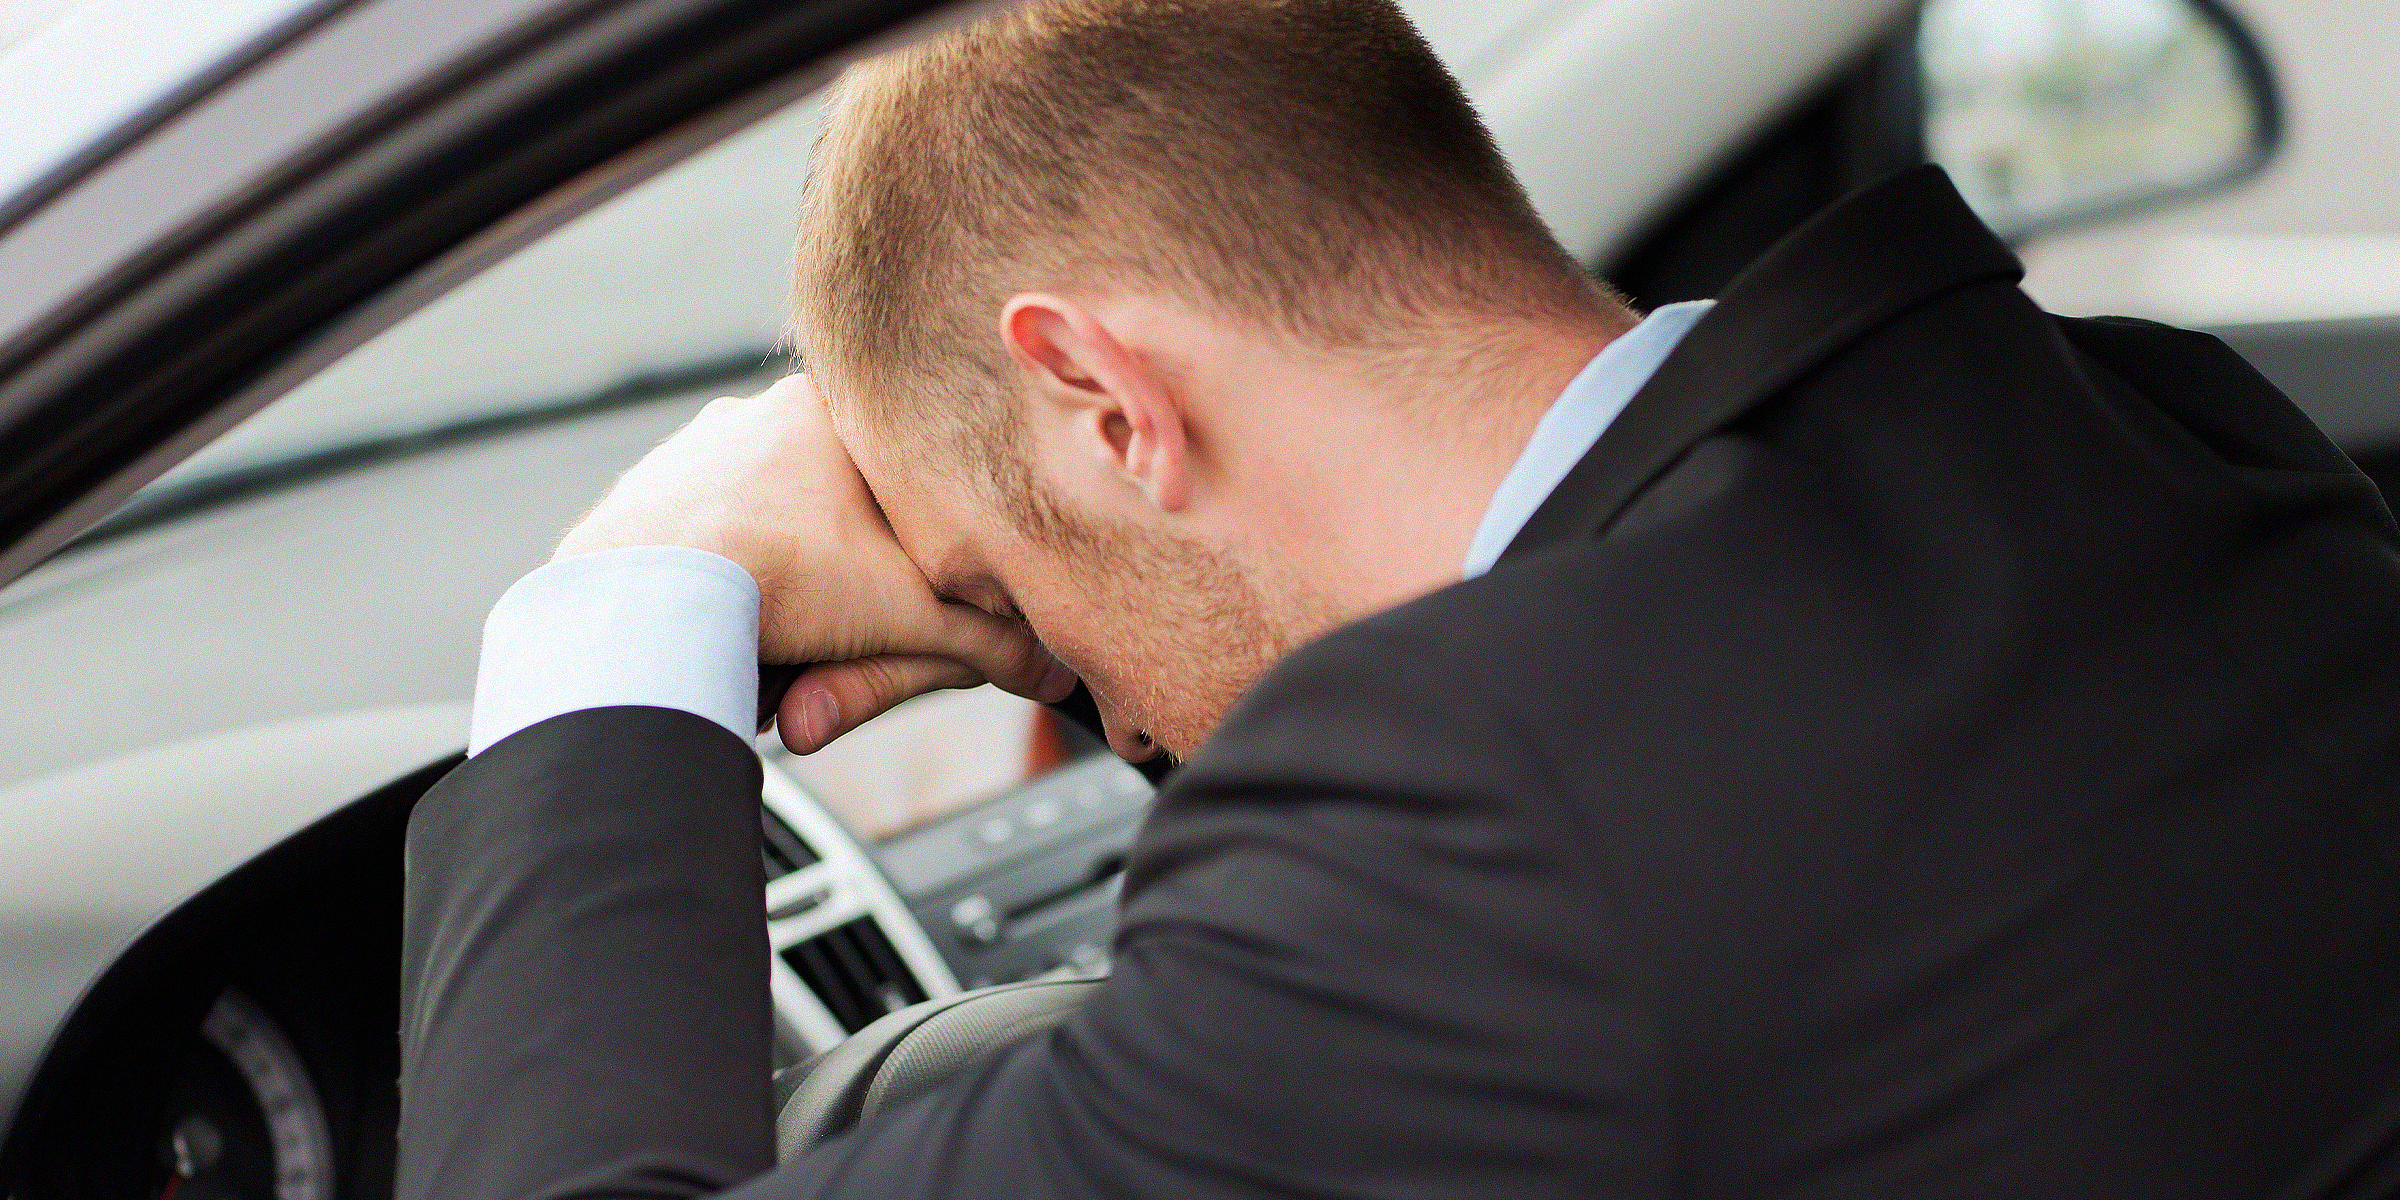 Man sitting in car with his head on the steering wheel | Source: Shutterstock